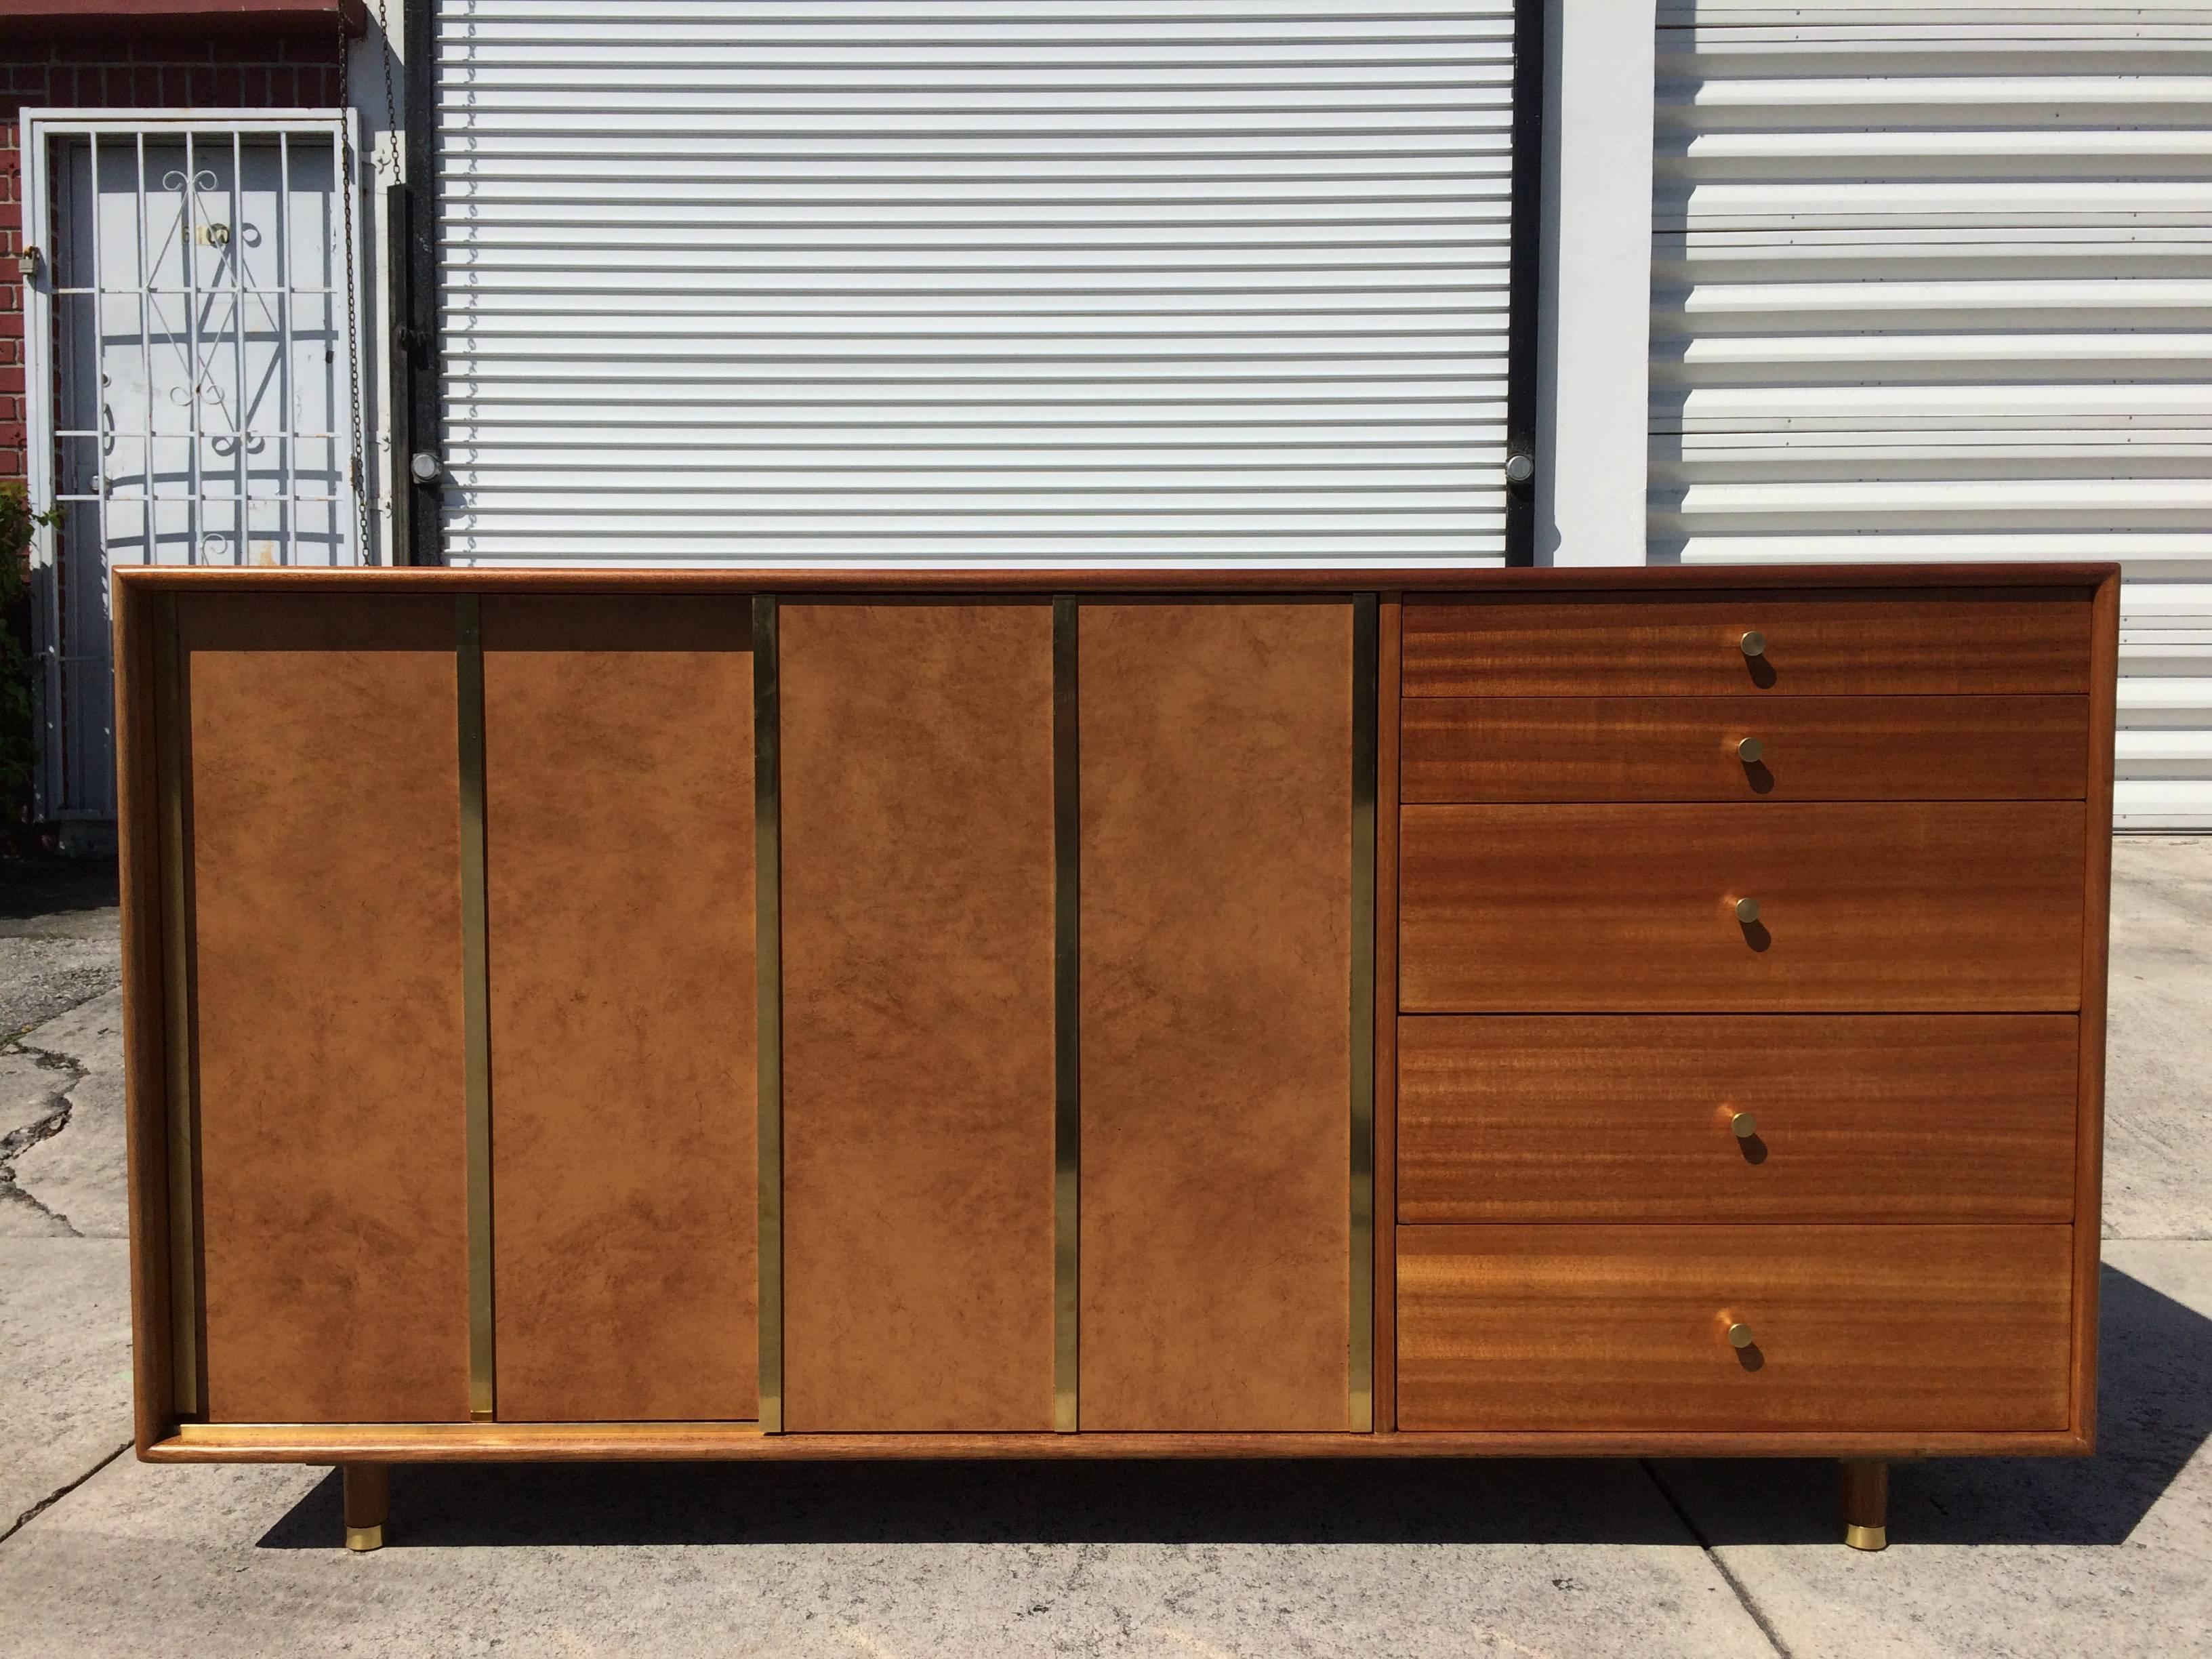 Credenza standing on five legs, five drawers and two sliding doors. Behind the sliding doors are four white drawers and three shelves.